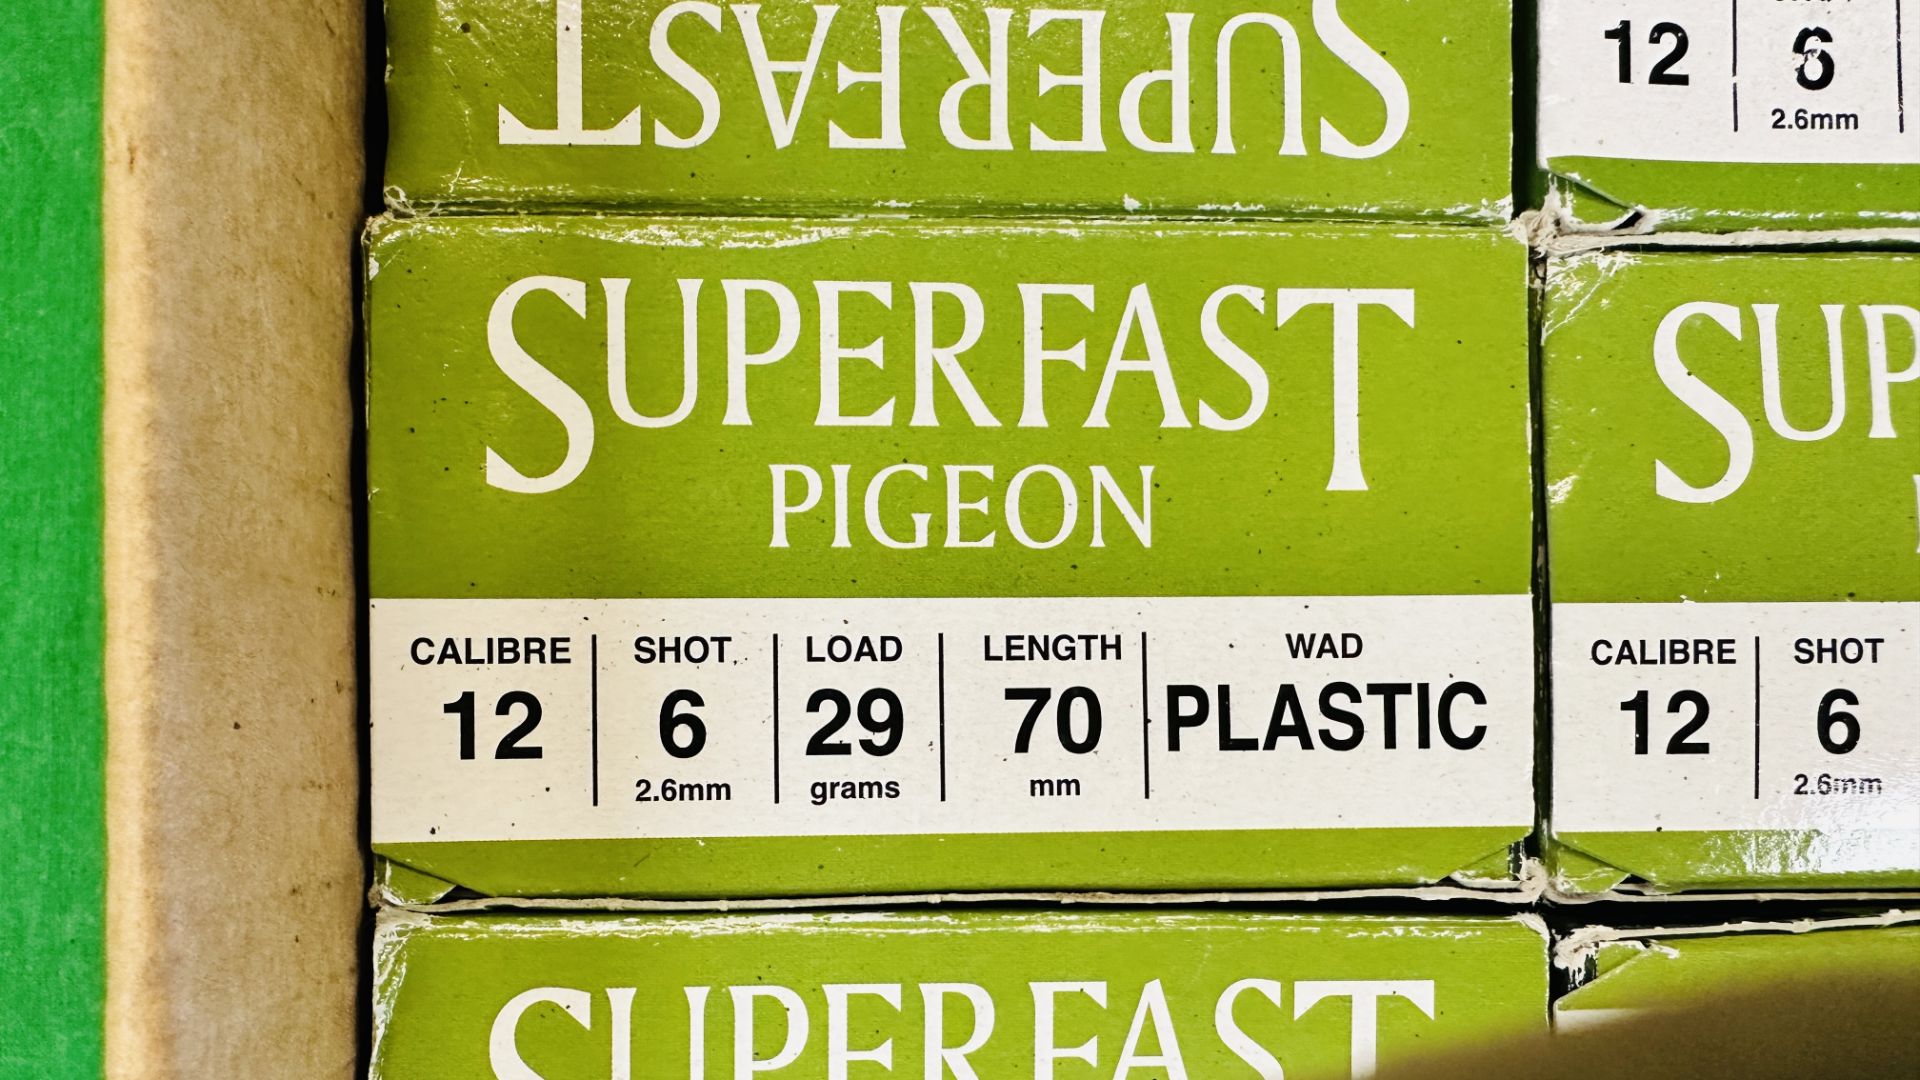 200 X HULL CARTRIDGE SUPERFAST PIGEON 12 GAUGE 29G 6 SHOT PLASTIC WAD CARTRIDGES - (TO BE COLLECTED - Image 2 of 3